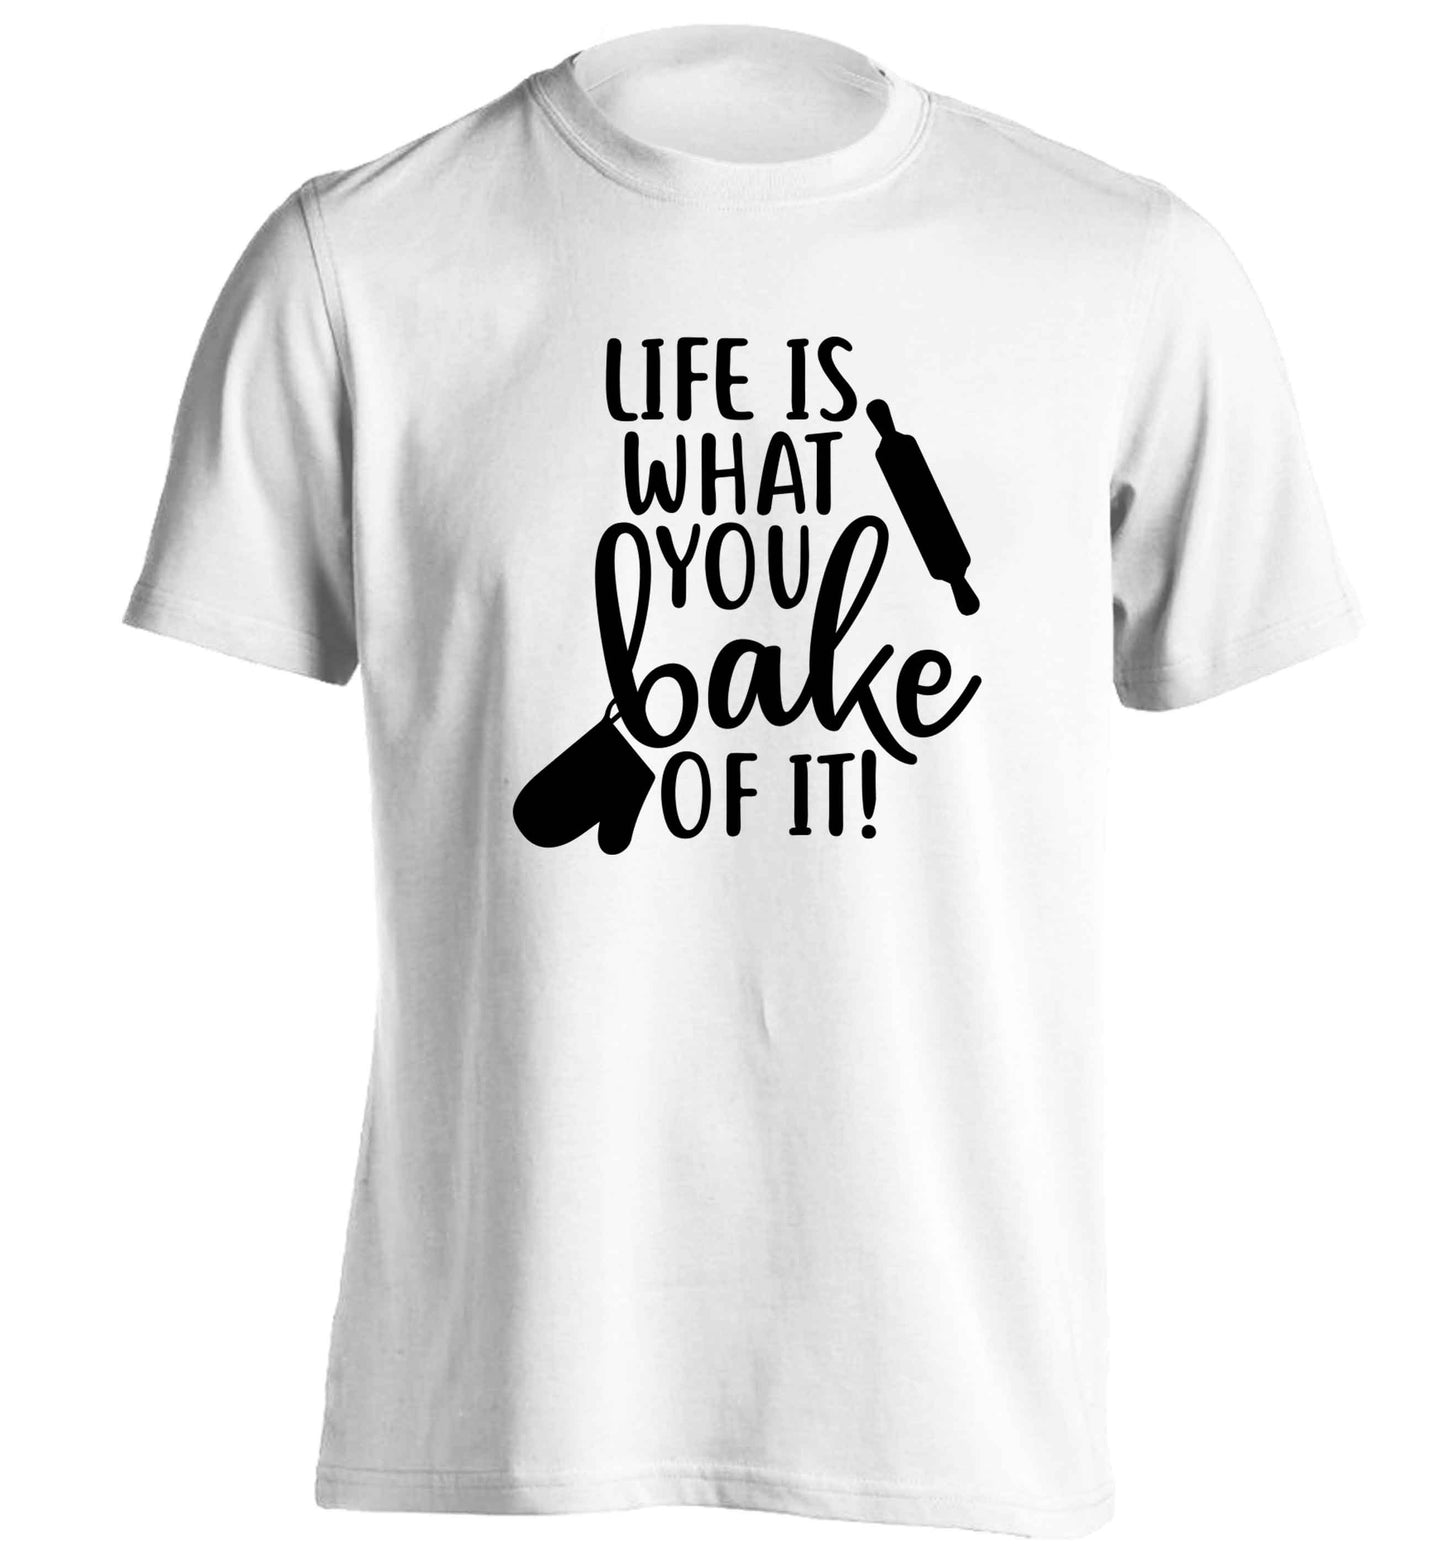 Life is what you bake of it adults unisex white Tshirt 2XL